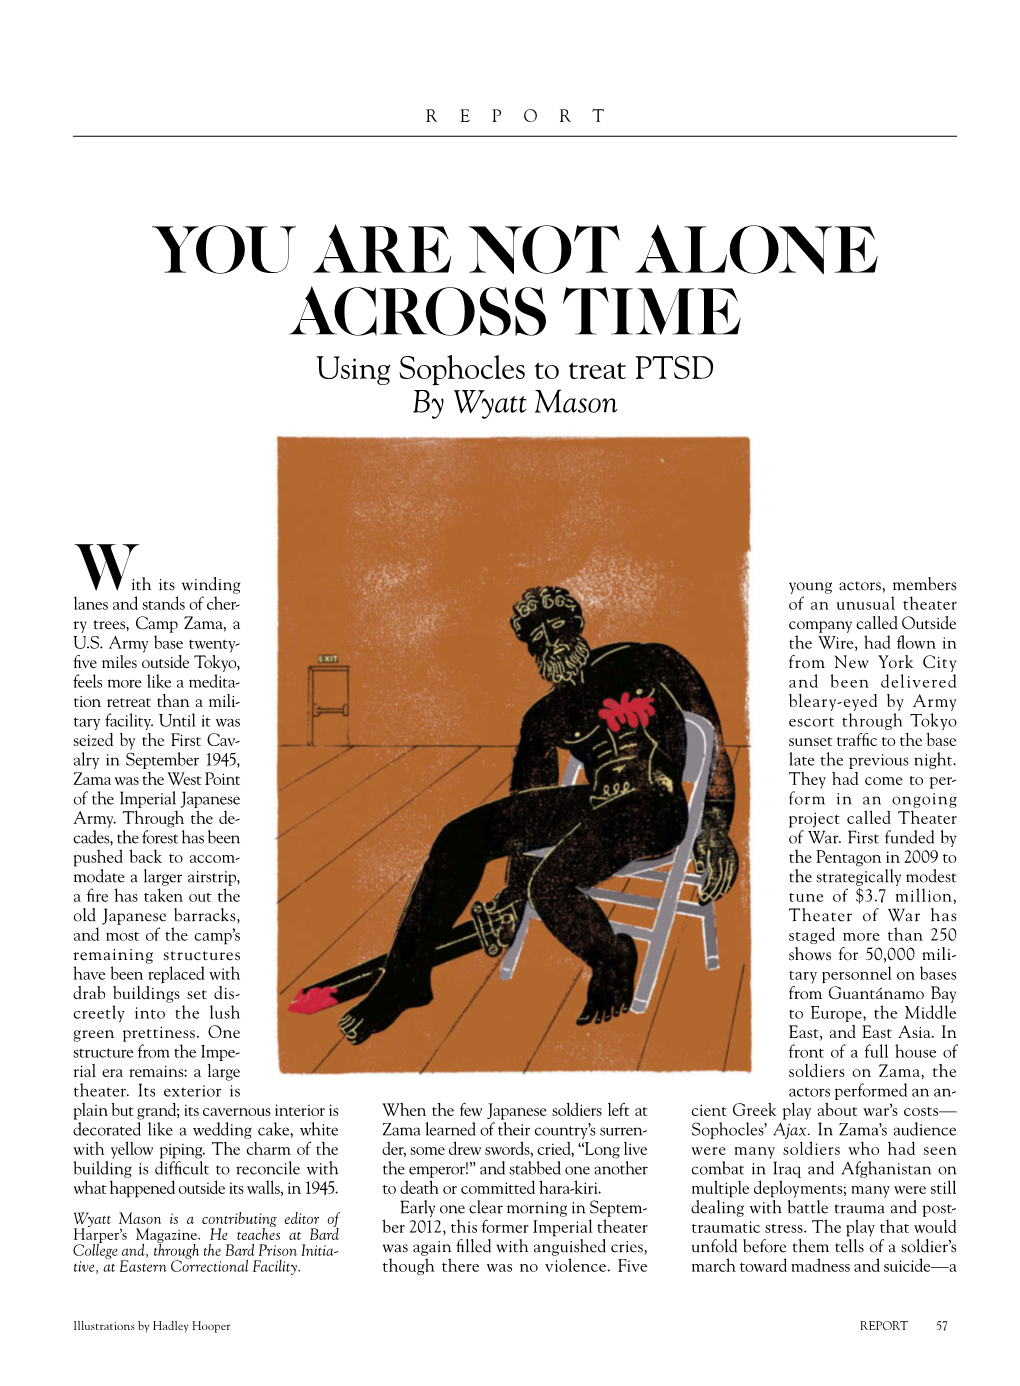 You Are Not Alone Across Time Using Sophocles to Treat PTSD by Wyatt Mason